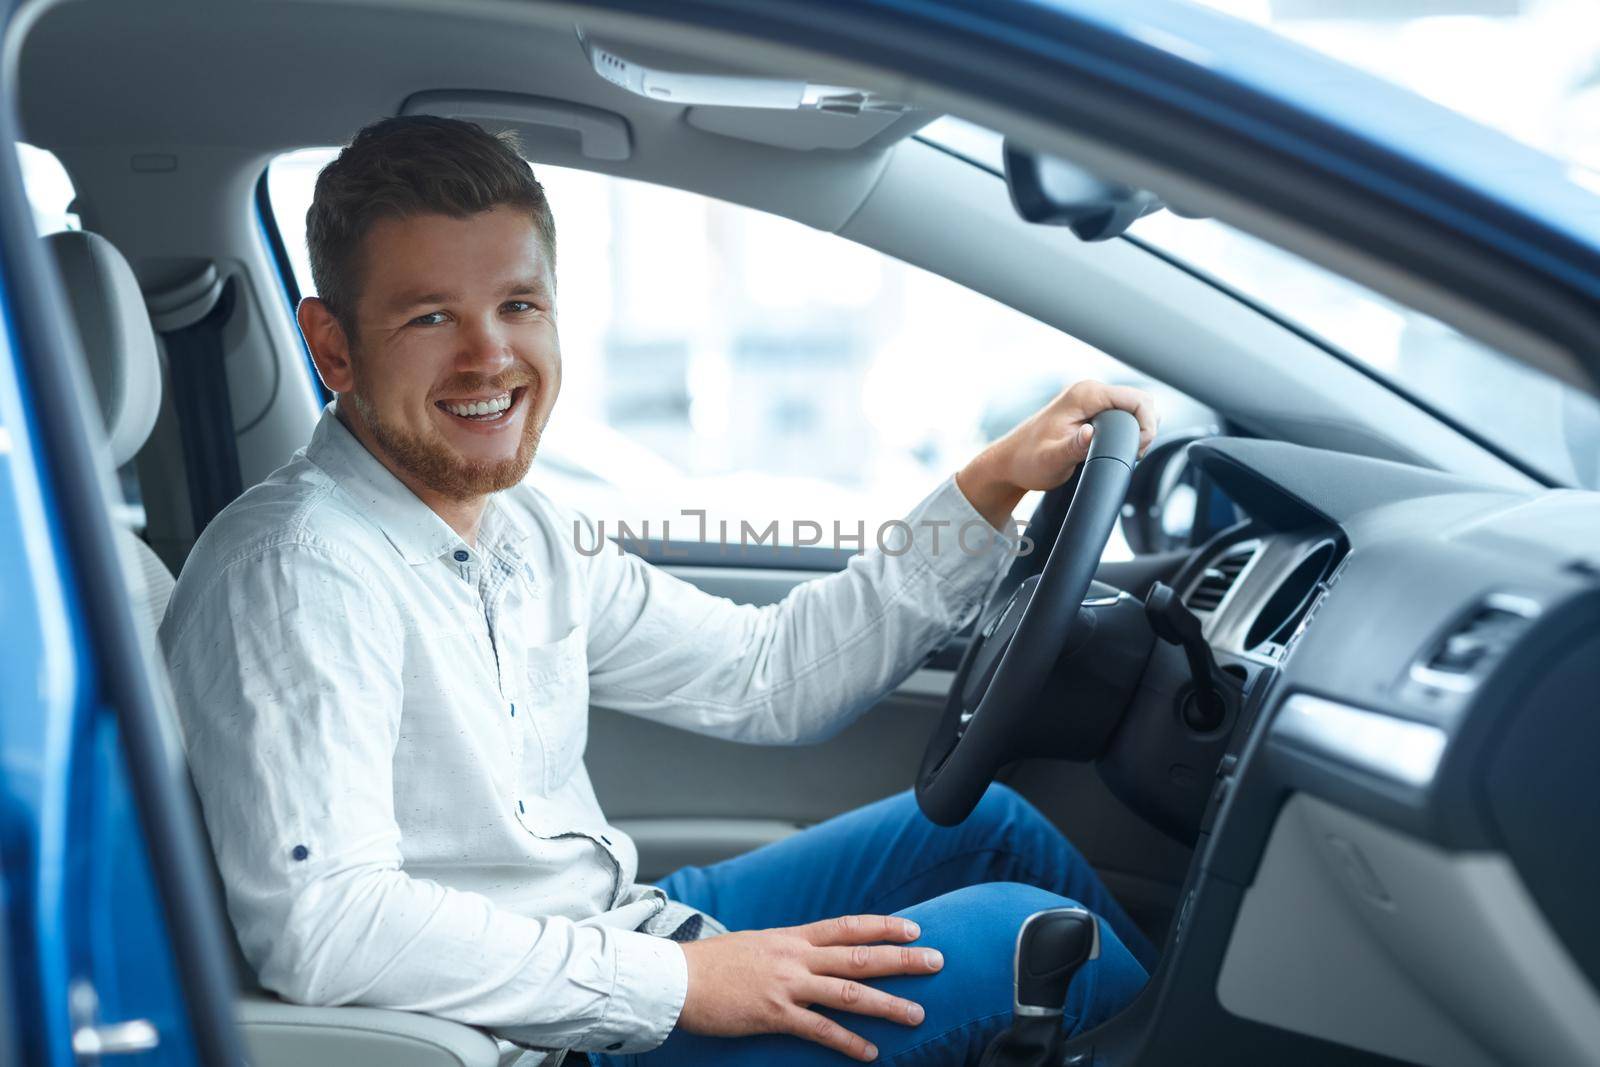 Dream came true. Portrait of a handsome bearded man sitting in his new car laughing to the camera happily